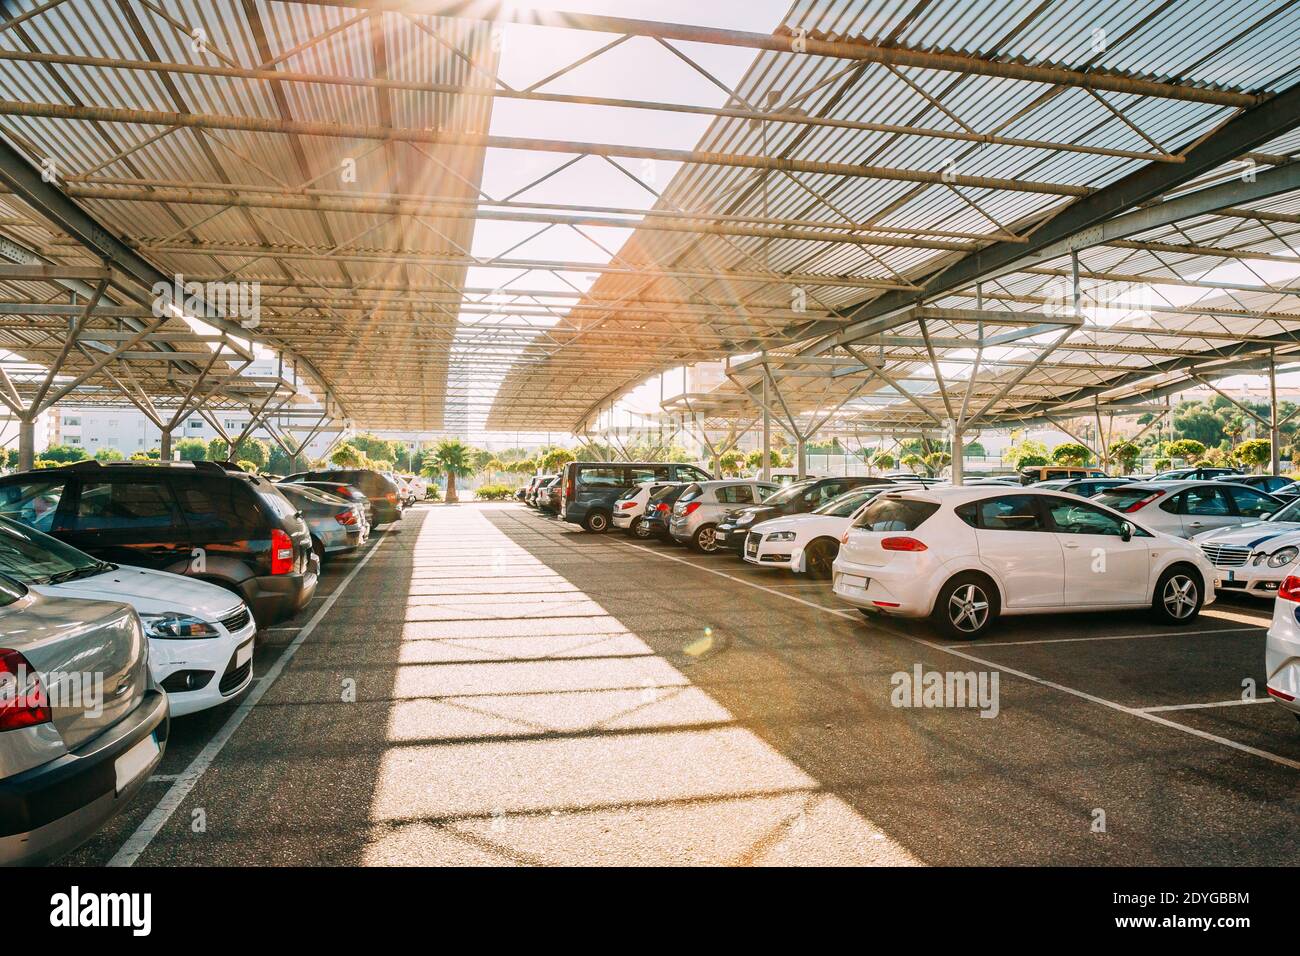 Cars on a covered parking lot in sunny summer day. Stock Photo